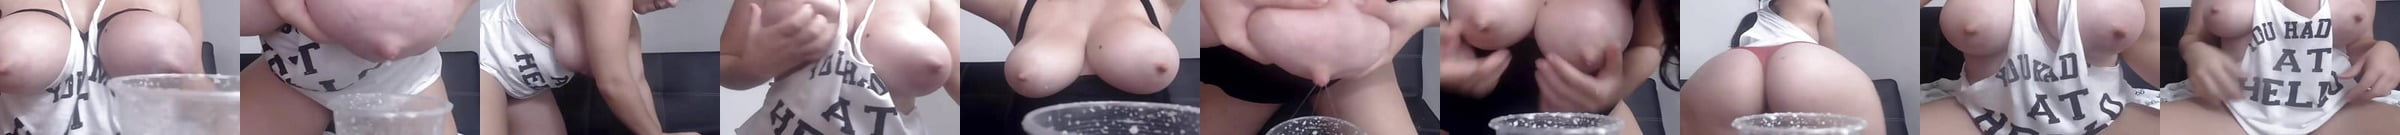 Milky Boobs Hand Expression Lactation Porn 99 Xhamster